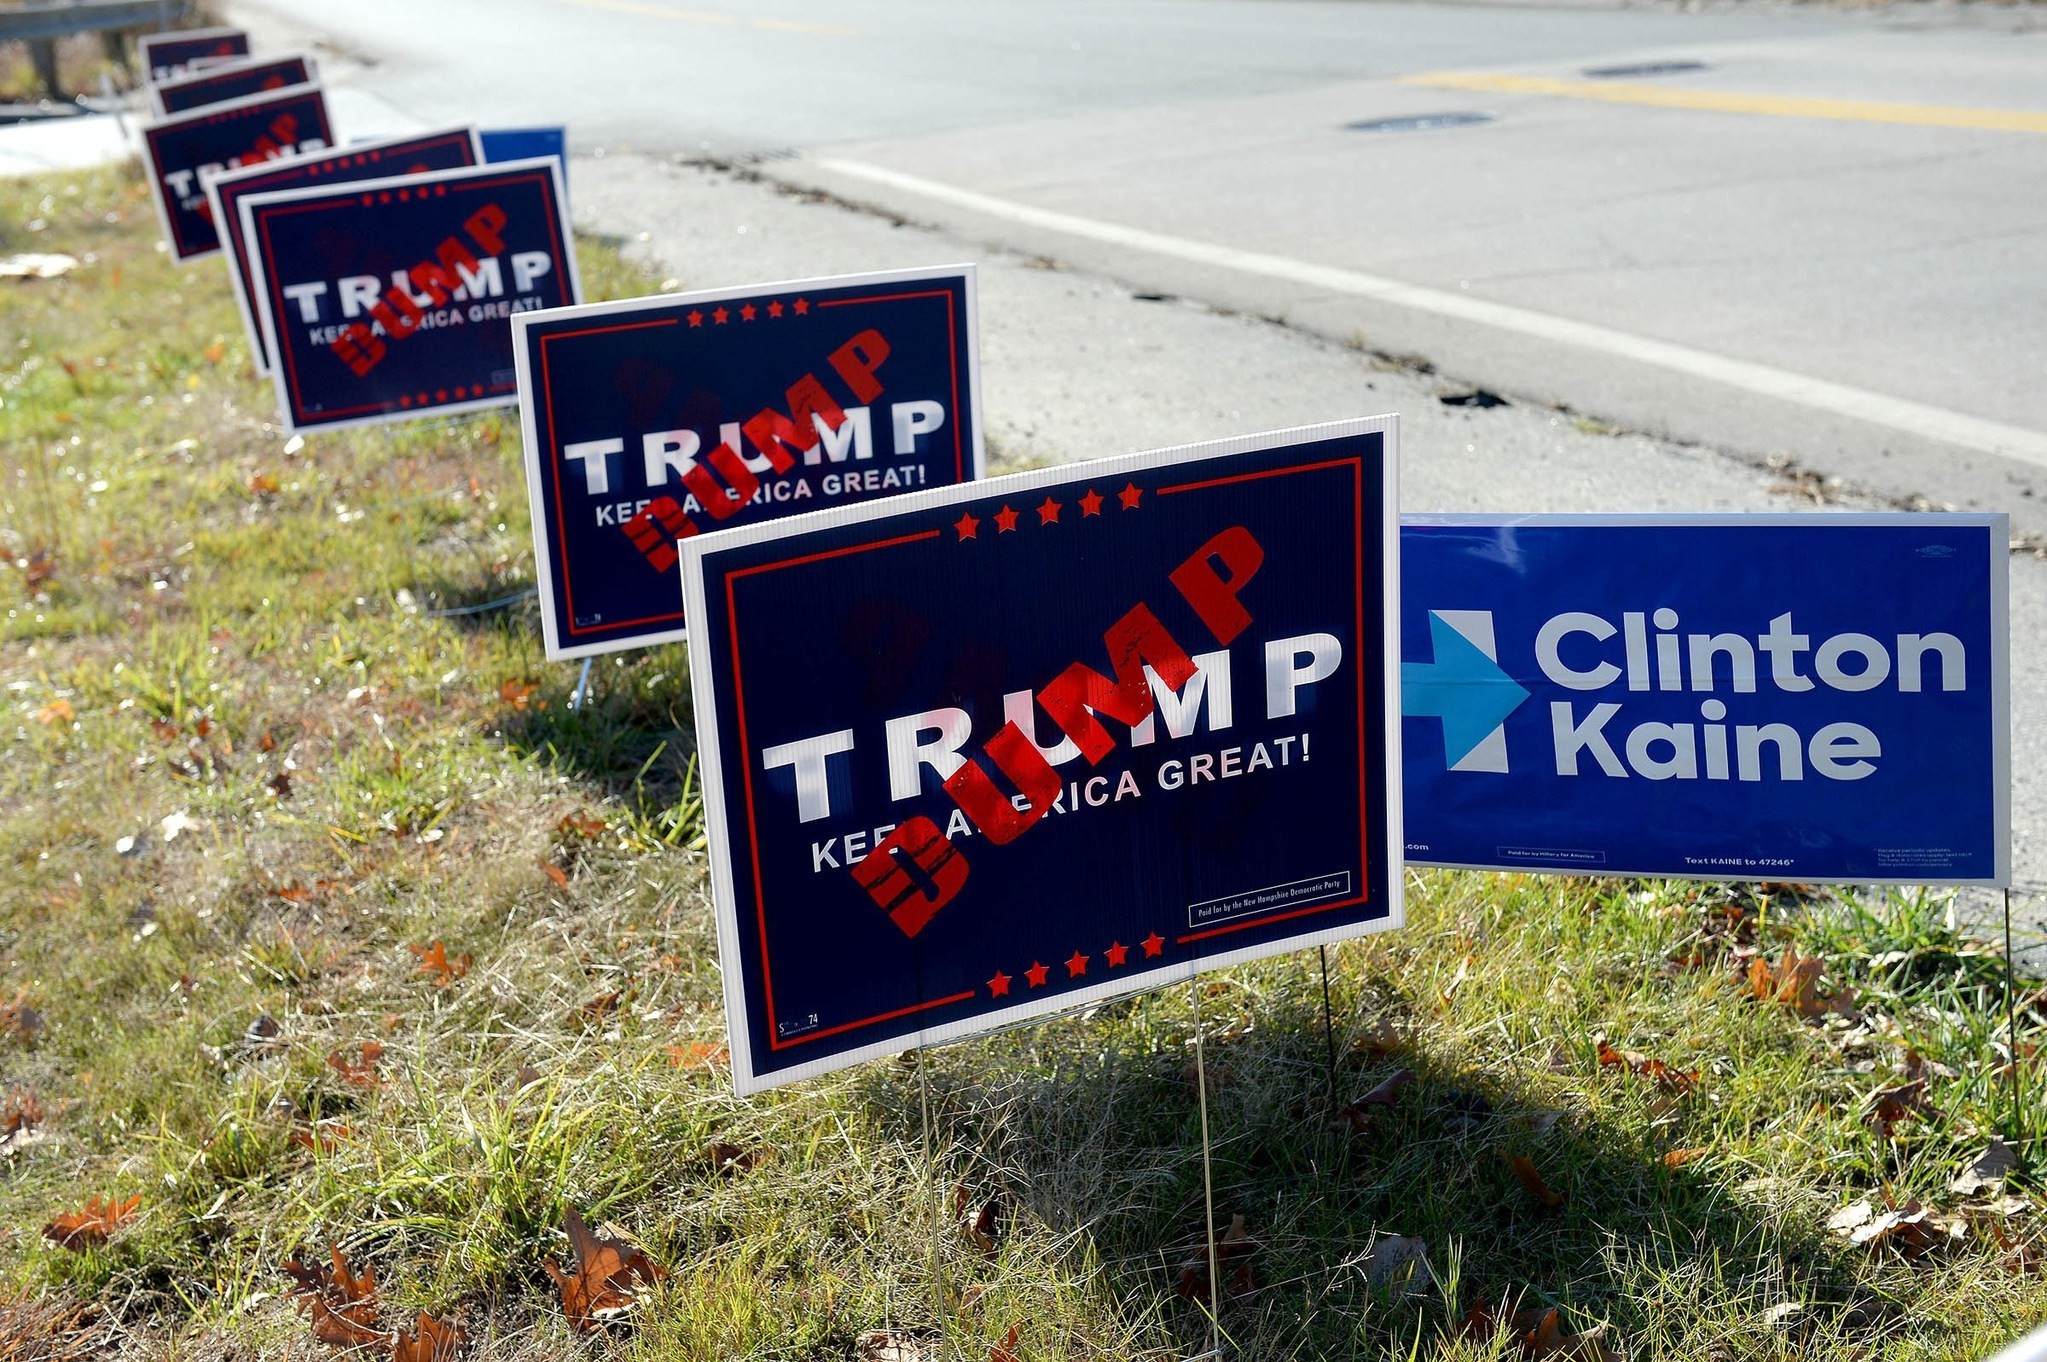  Dump Trump and Clinton/Kaine signs line a traffic circle on November 8, 2016 in North Manchester, New Hampshire. (AP Photo)